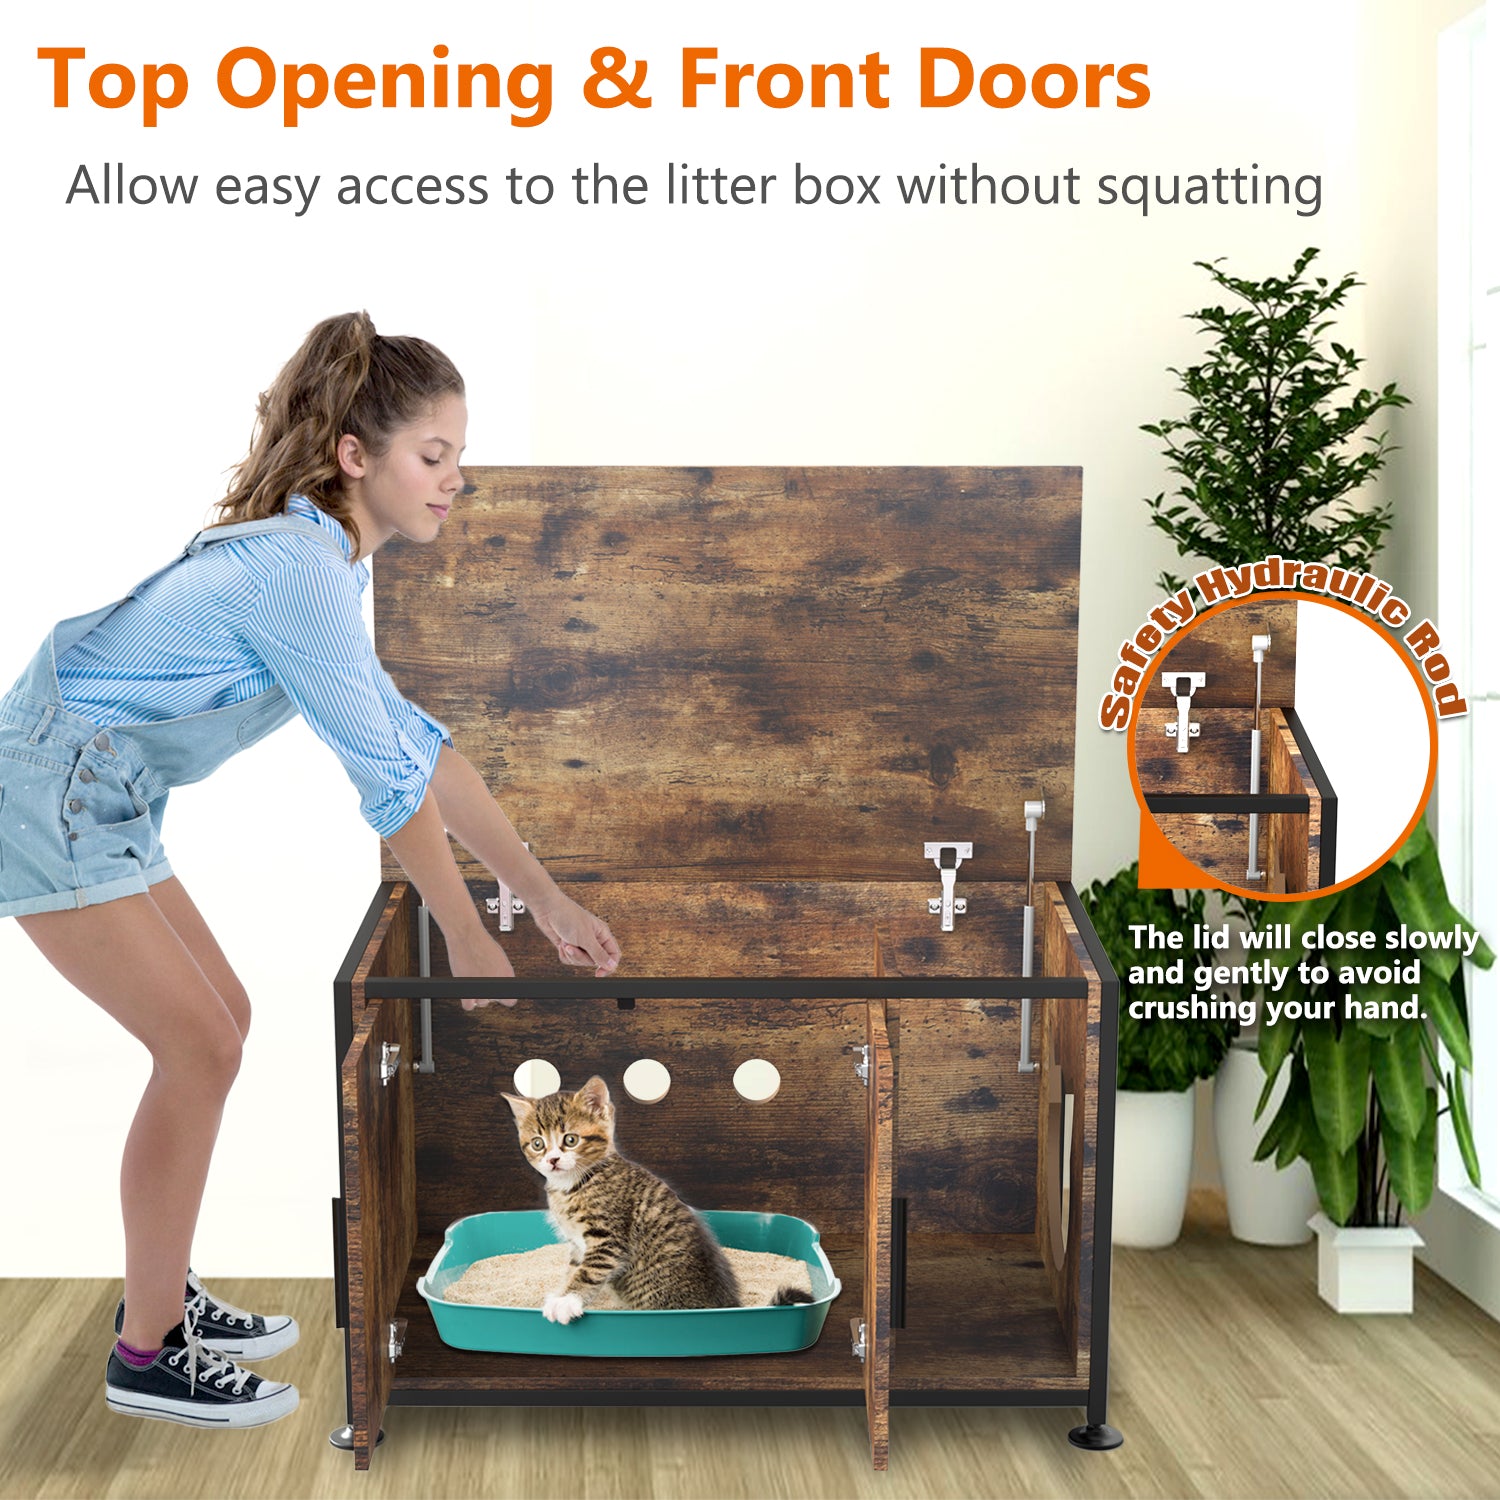 Natureasy Cat Litter Box Furniture Hidden Litterbox Enclosure Top Opening Cat Washroom Storage Bench Sturdy Large Enclosed Decorative Litter Tray Cabinet Side Table Cat House with Door & Entryway